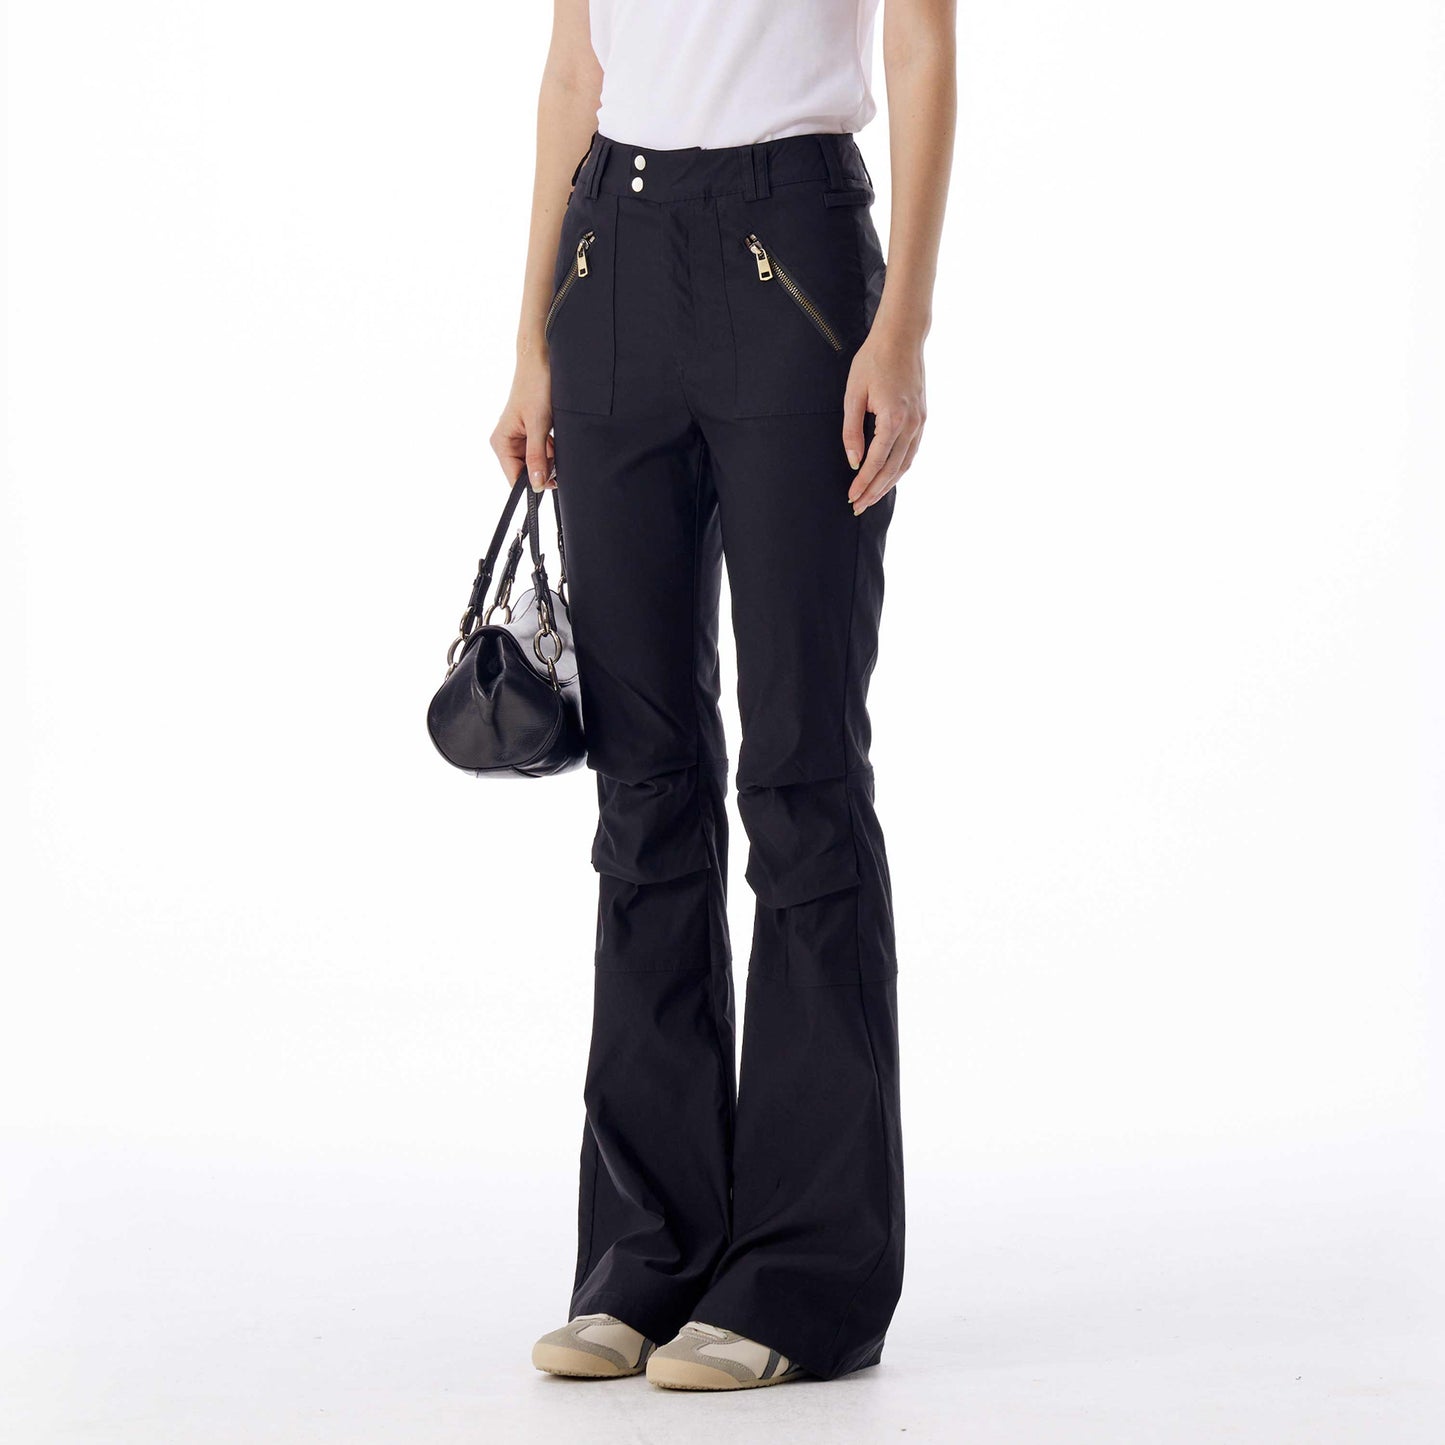 NUTH Black Flared Cargo Pants